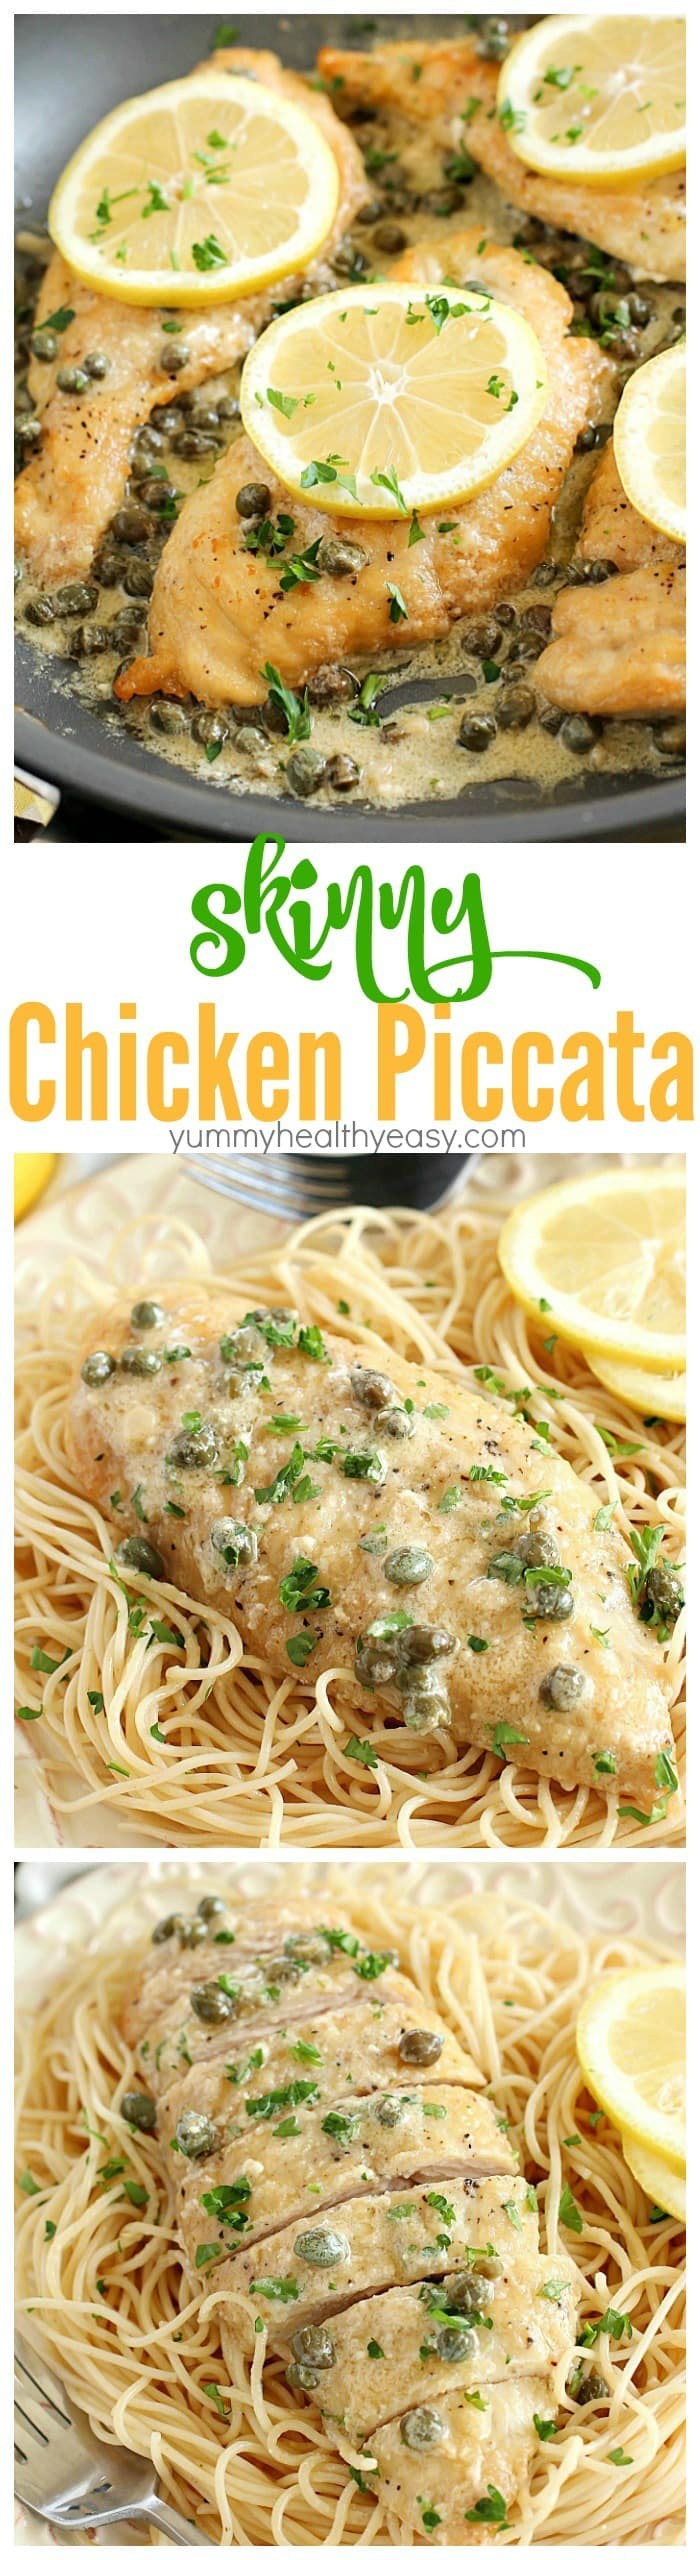 This Chicken Piccata Recipe is lighter (aka skinny) and is so easy to make! Perfect on a busy weeknight but also fancy enough to make when you have company over! It’s made in only one pan and is bursting with lemony, buttery, creamy flavor. So much flavor in every bite of tender chicken!